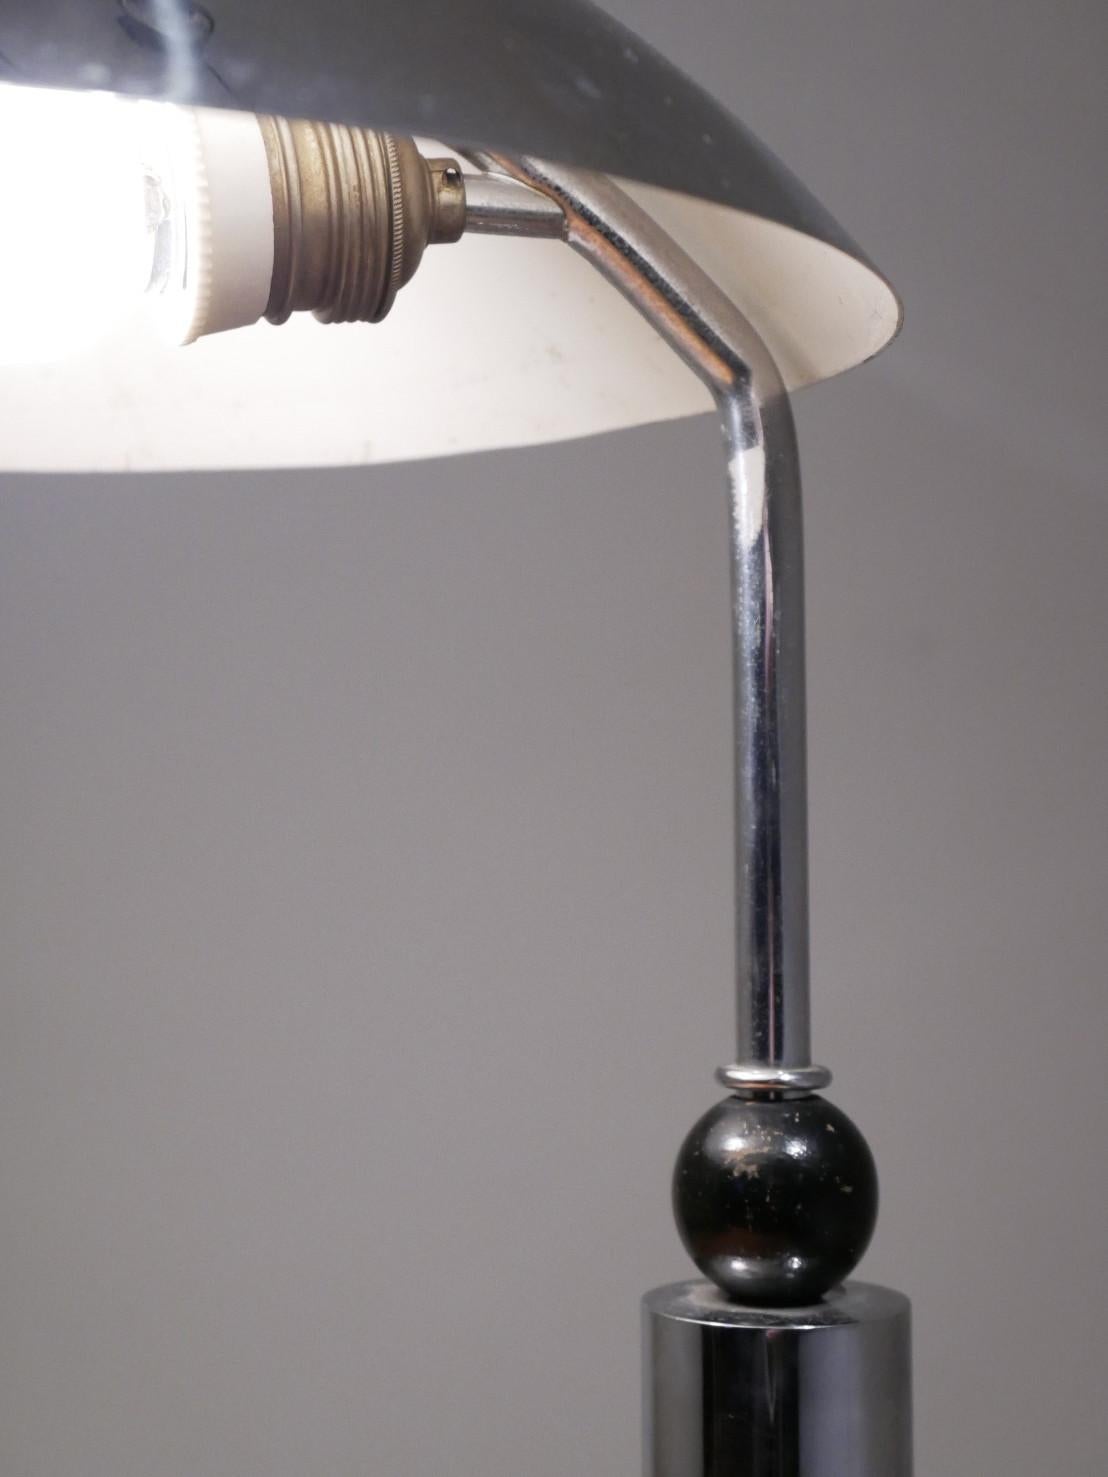 Desk lamp by KMD Daalderop from Tiel in The Netherlands, dating from the mid-1930 it comes complete in its nicest color - chromed metal with black base and central knob.